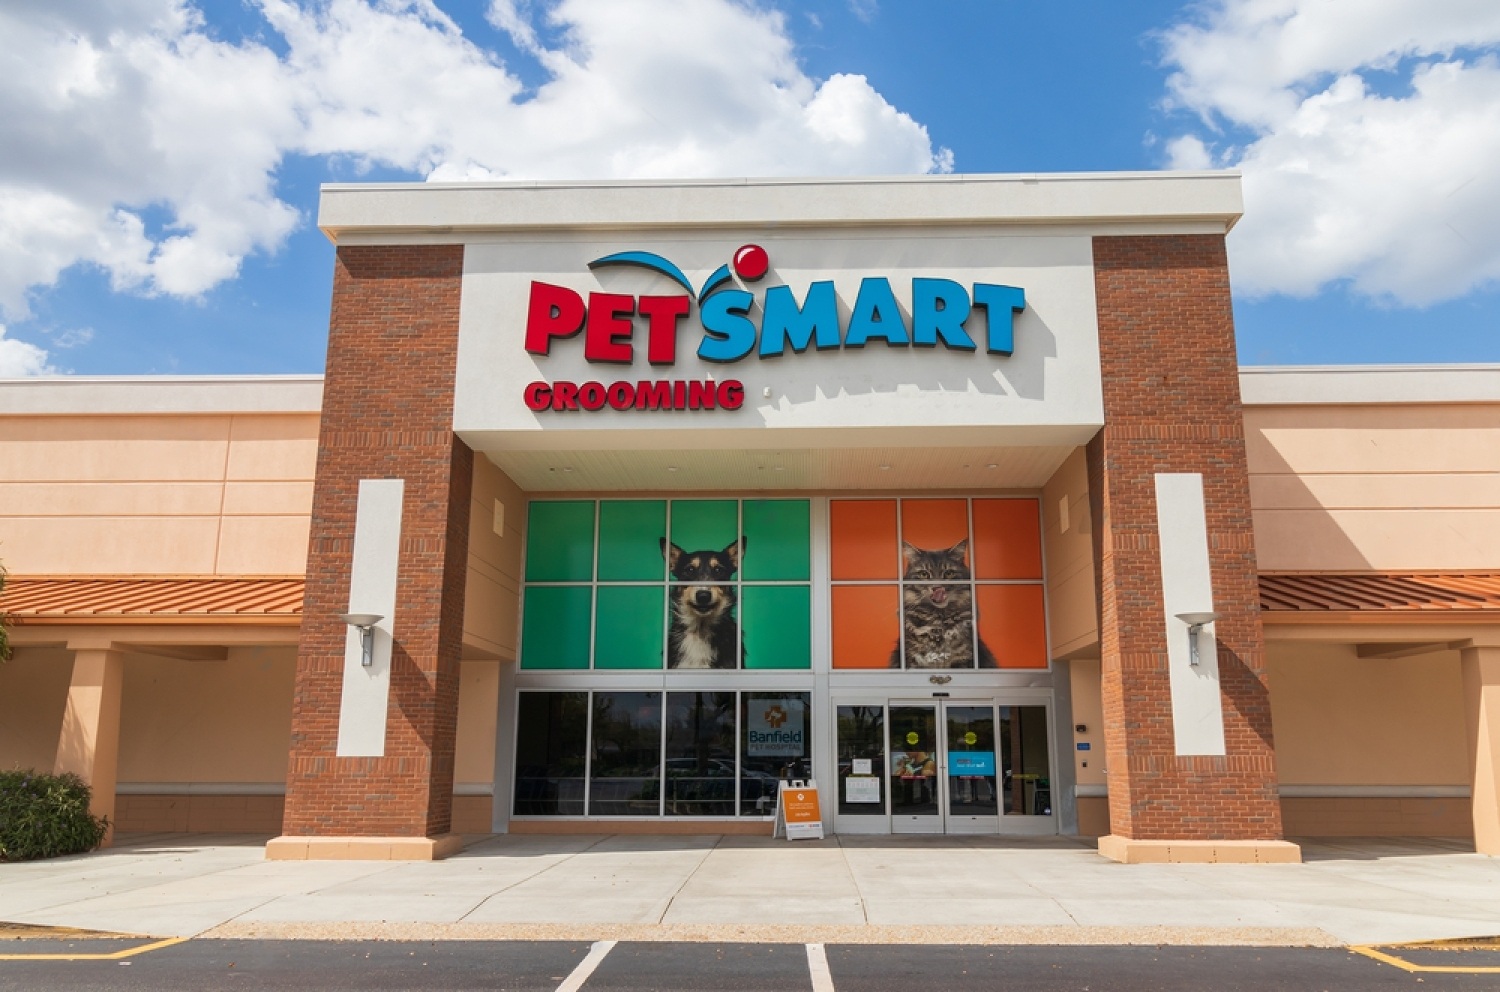 How Much Does PetSmart Grooming Cost?